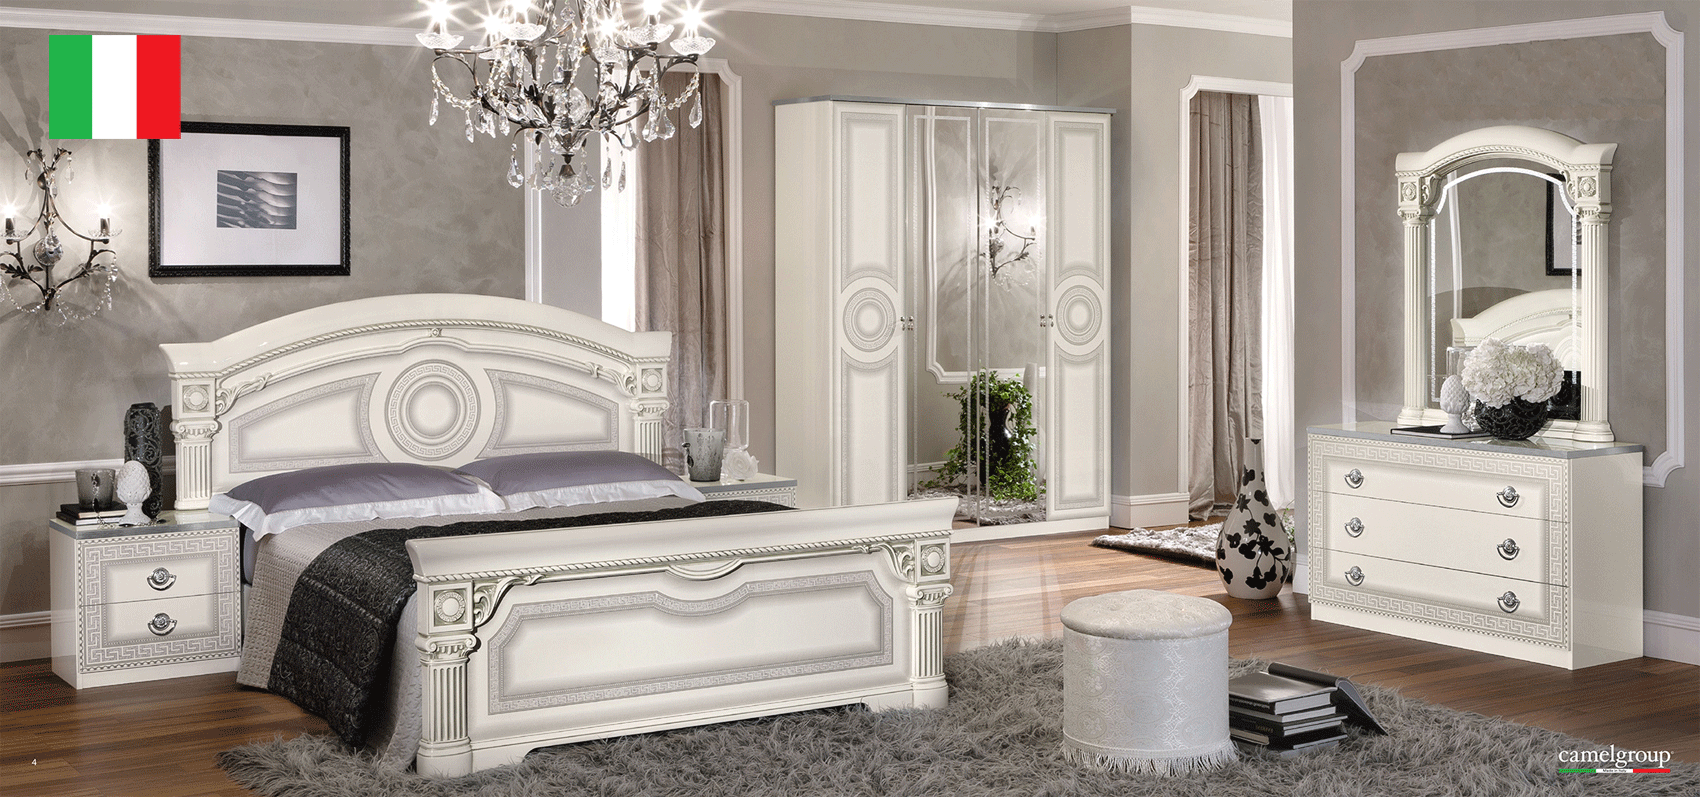 Dining Room Furniture Modern Dining Room Sets Aida Bedroom, White w/Silver, Camelgroup Italy